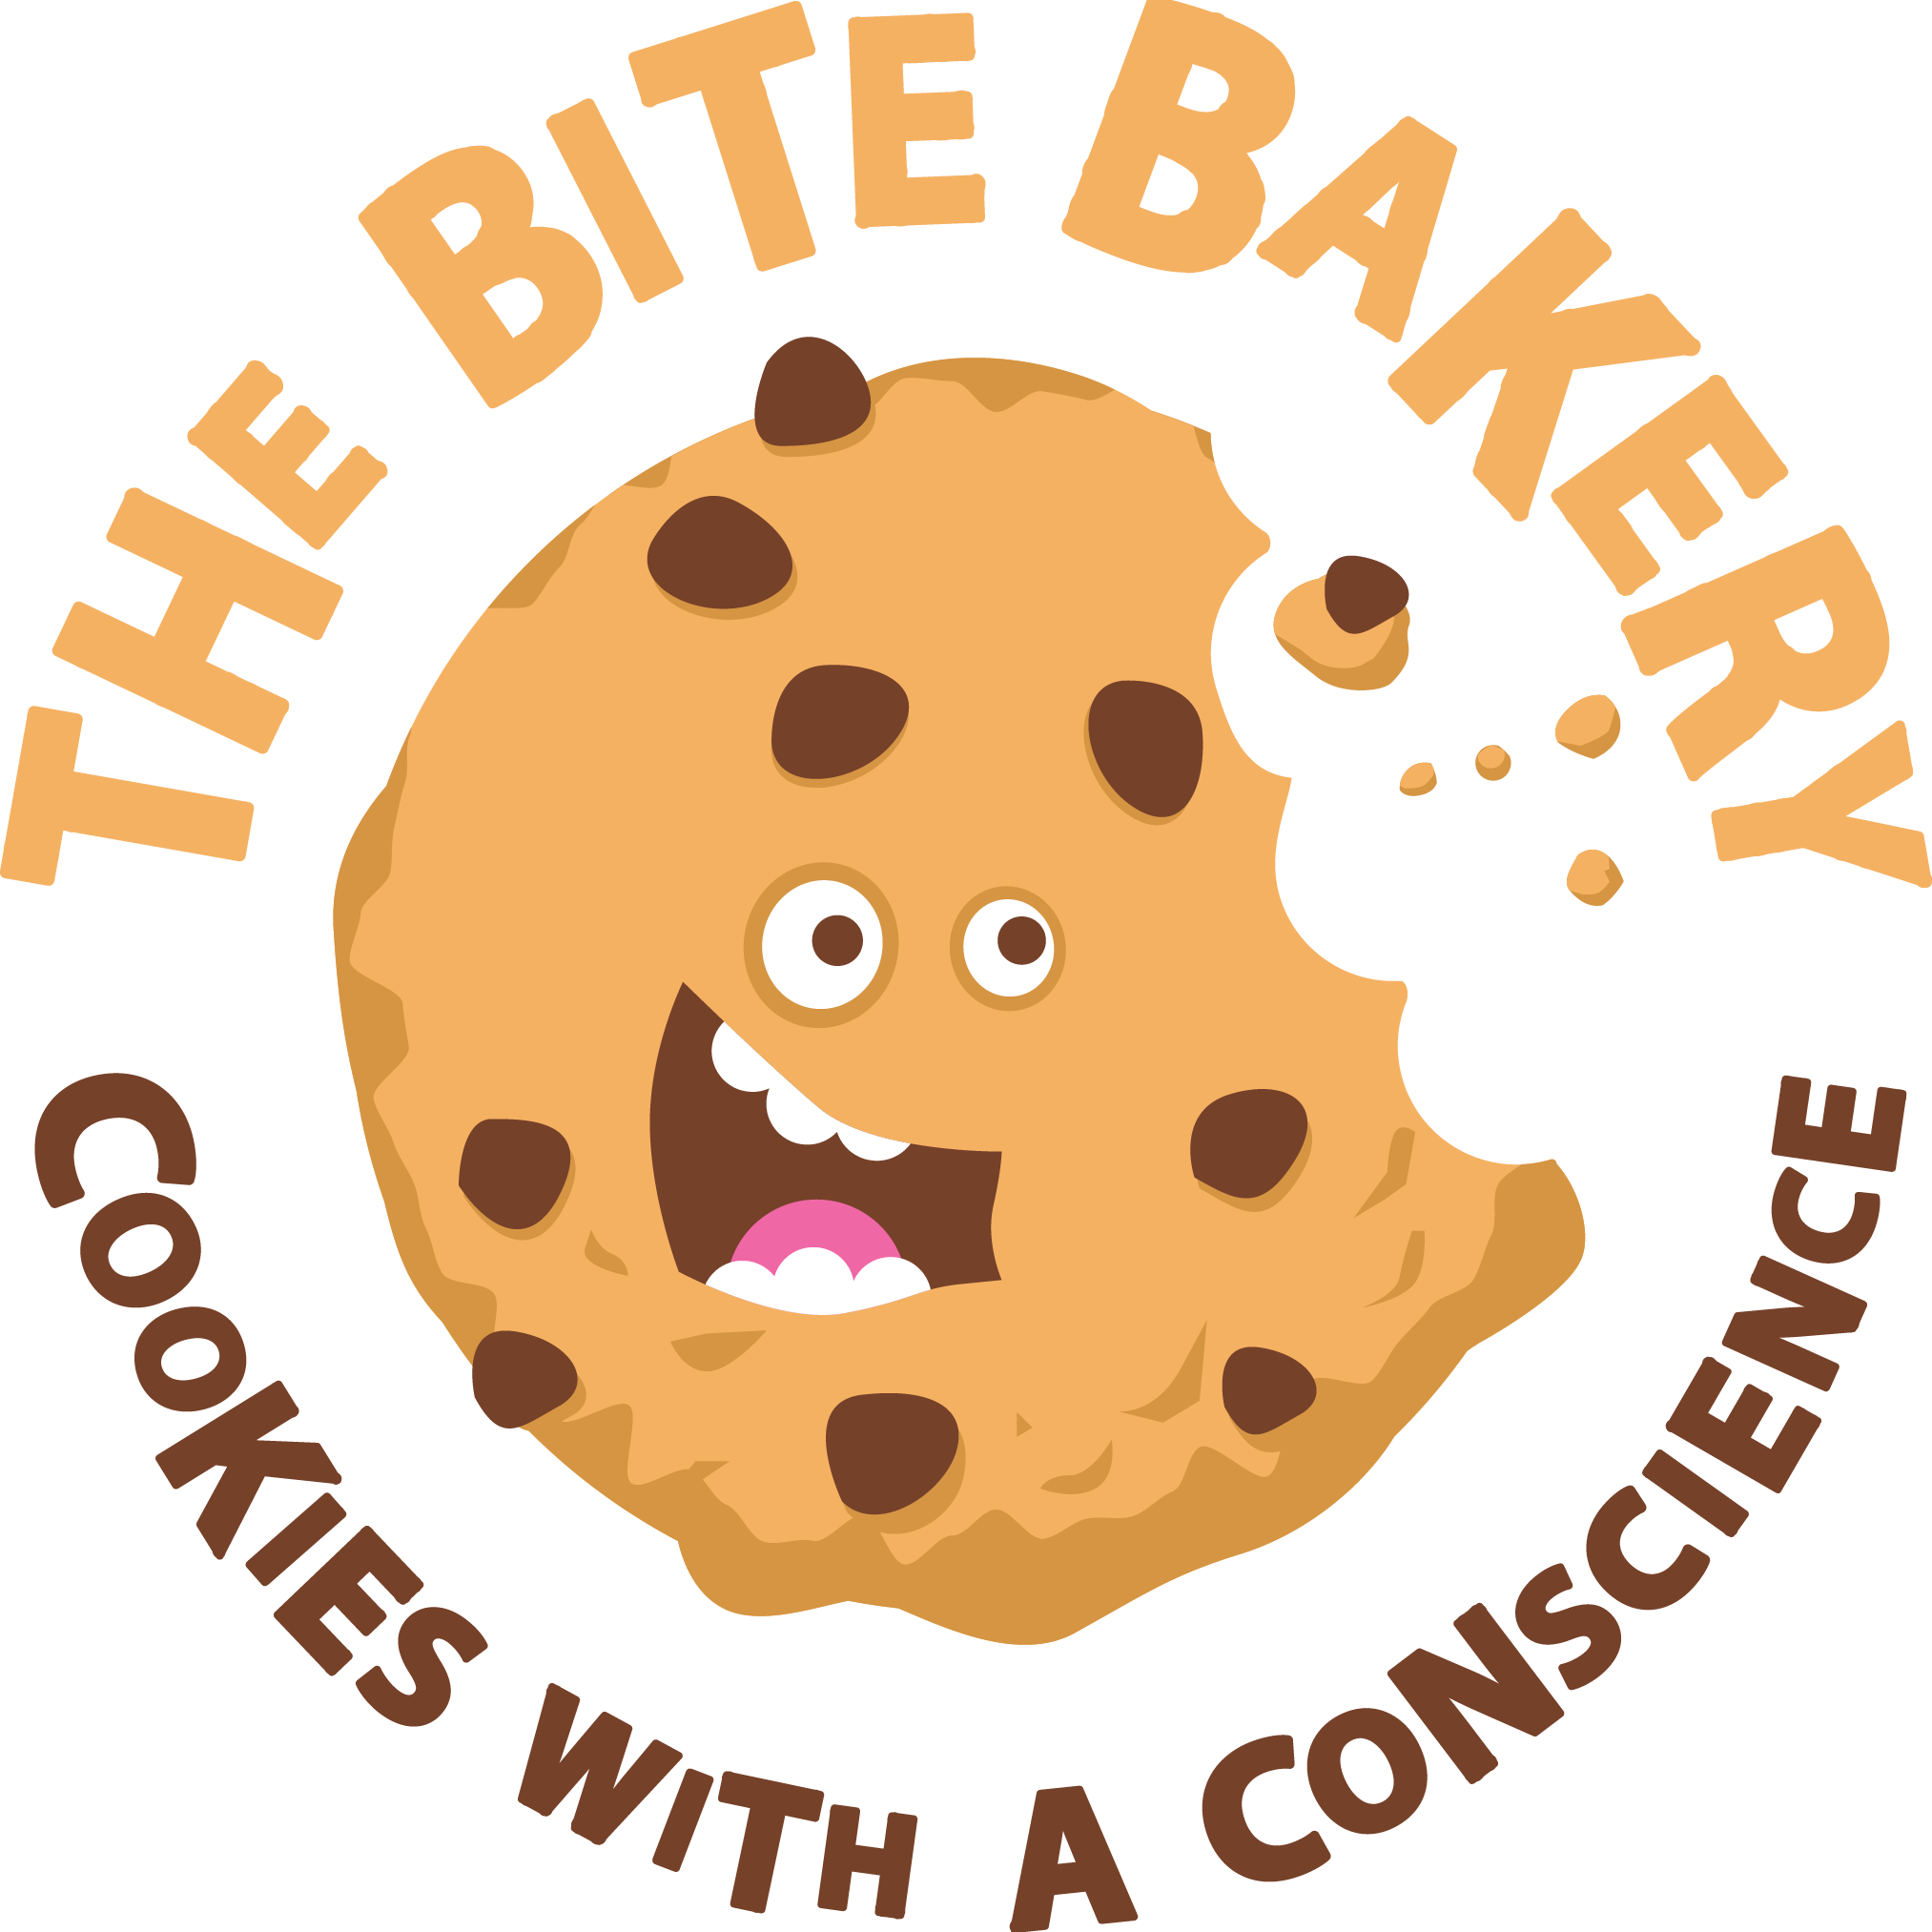 Cookies With A Conscience | All Natural, Dairy-Free, Egg-Free, Gluten-Free, Soy-Free, Nut-Free | 407.416.8506 | thebitebakery@gmail.com